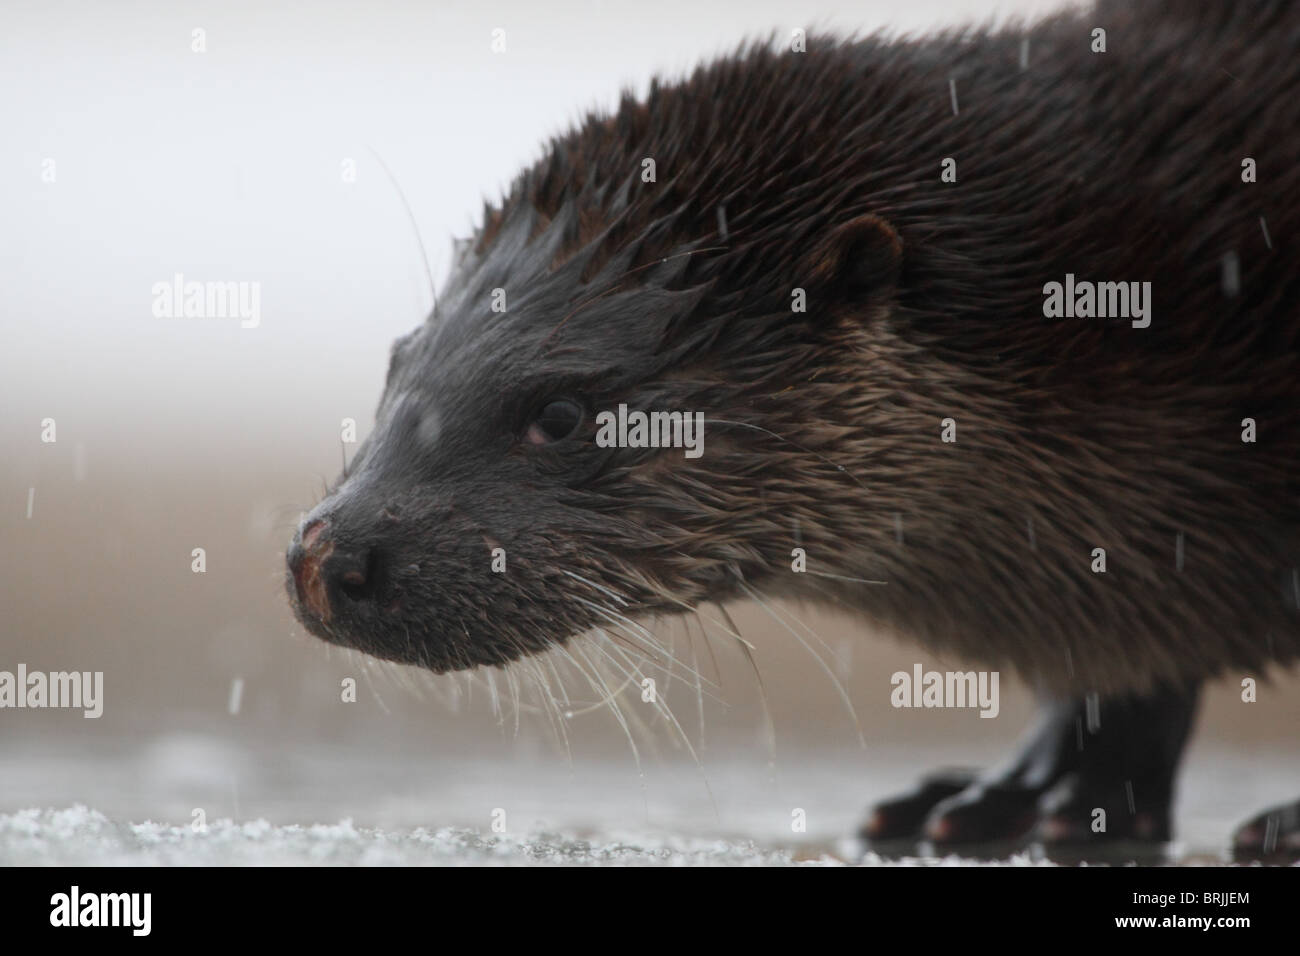 Wild European Otter (Lutra lutra) portrait of adult Stock Photo